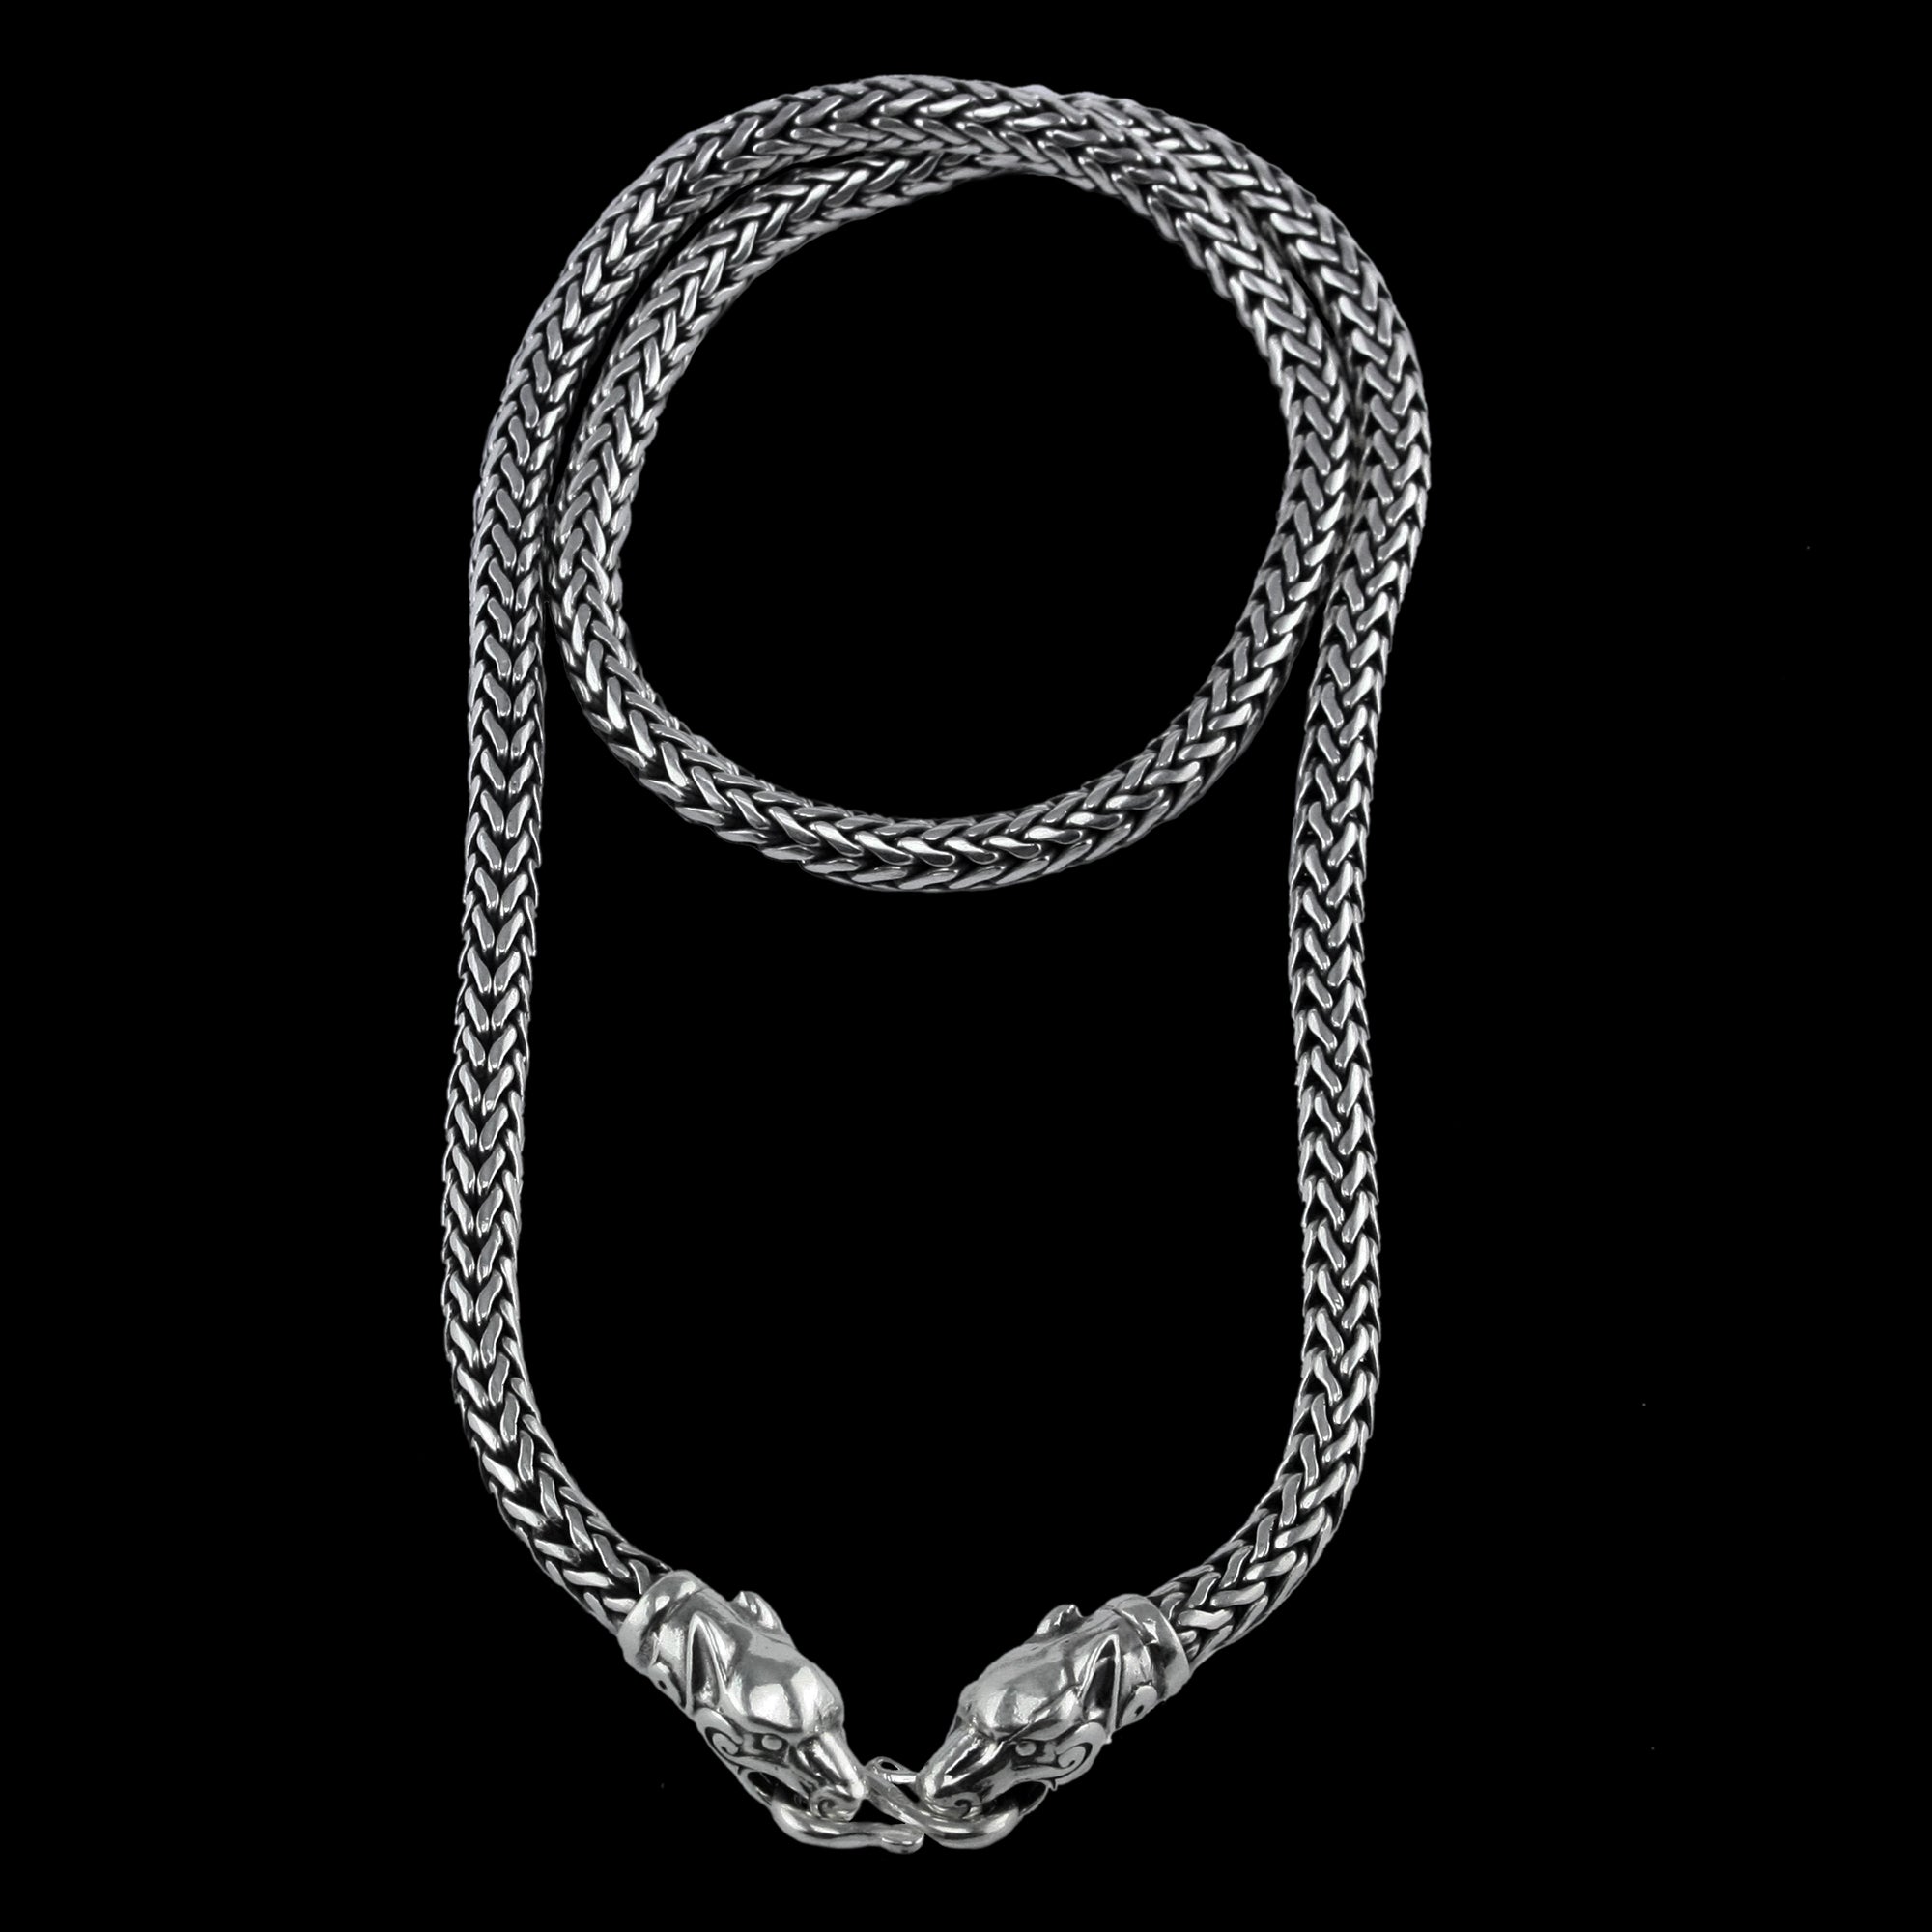 5mm Silver Snake Chain Necklace with Ferocious Wolf Heads